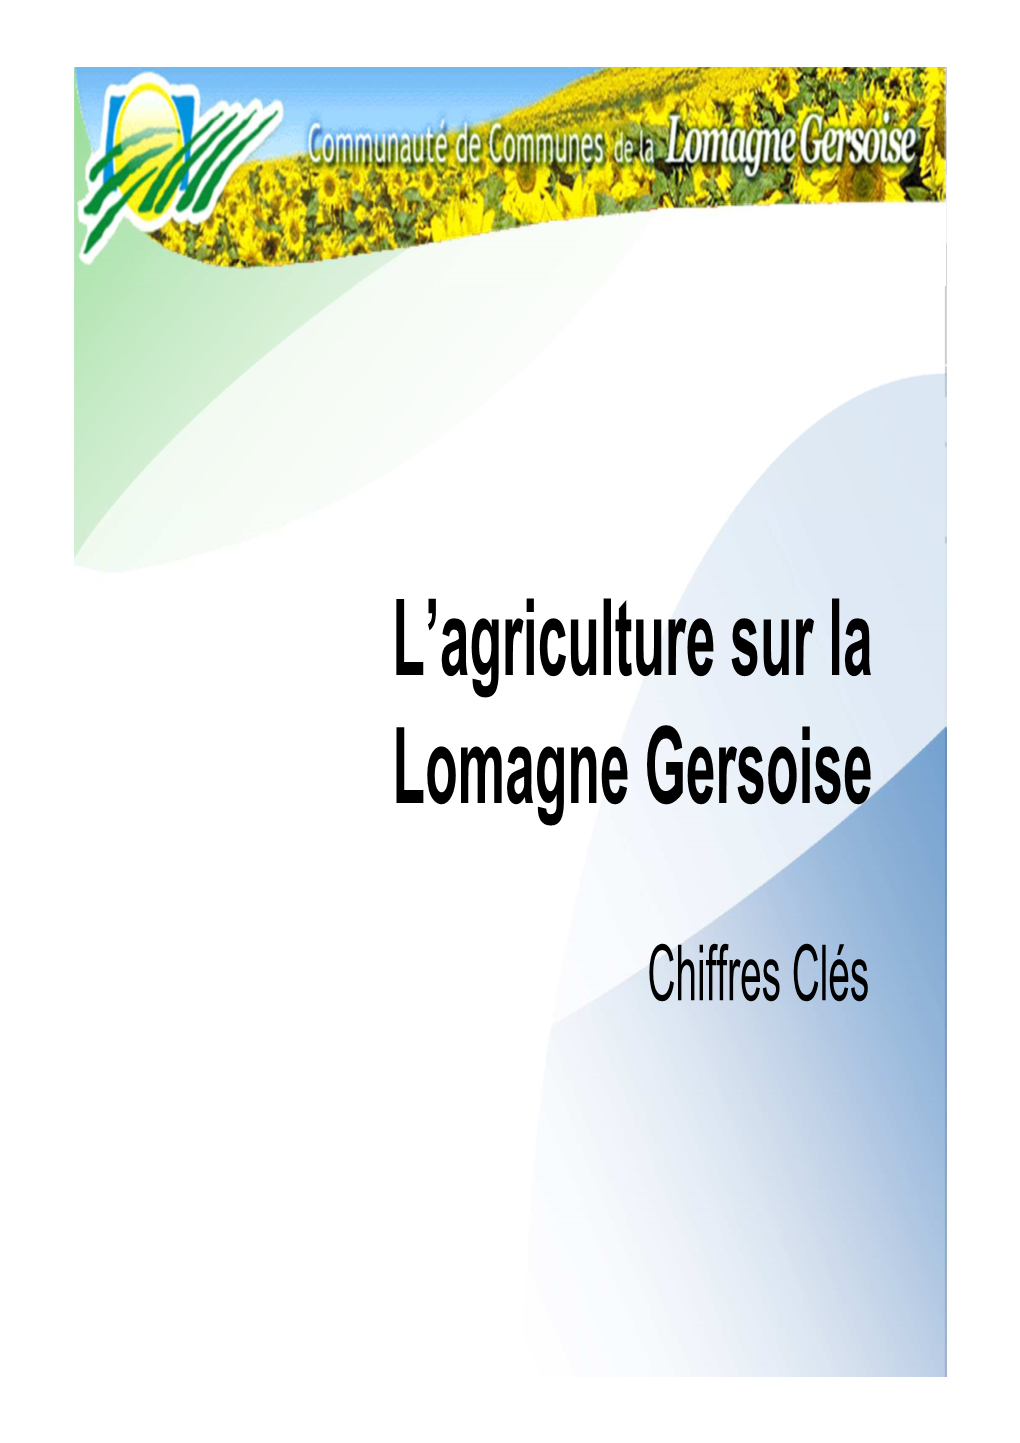 2015 Indicateurs Agriculture